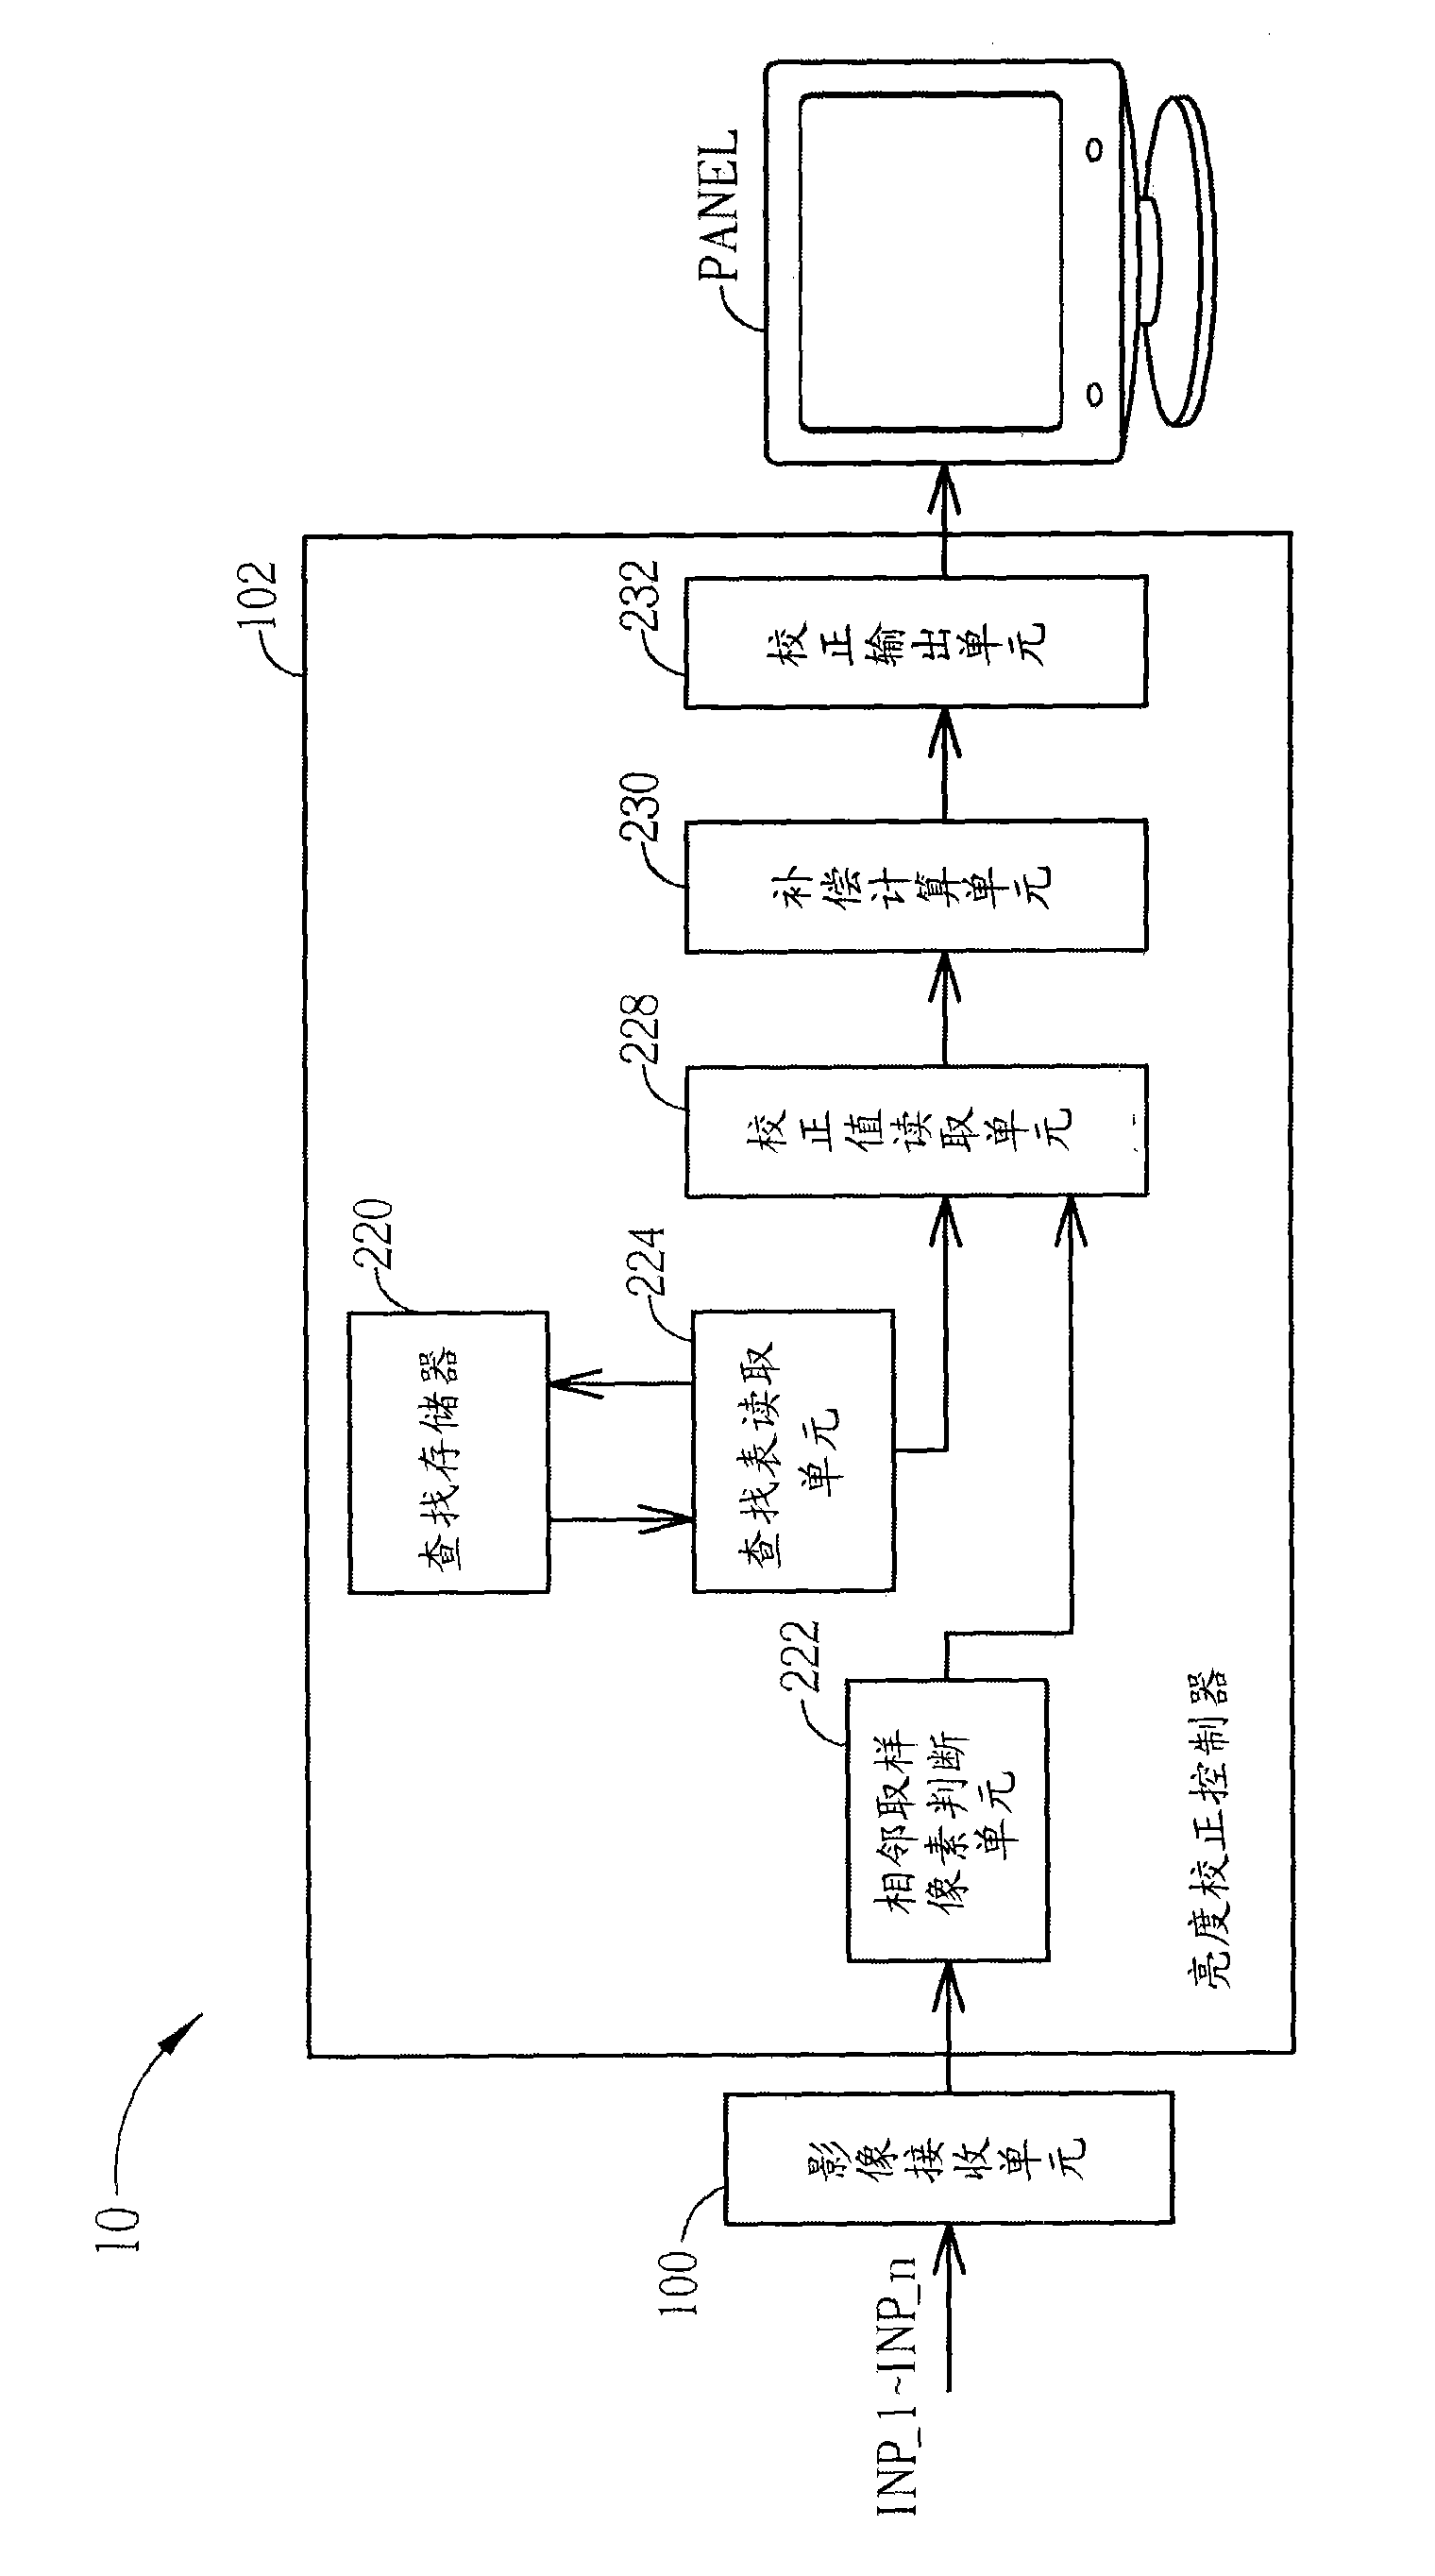 Control method for increasing brightness consistency, brightness correction controller and display device